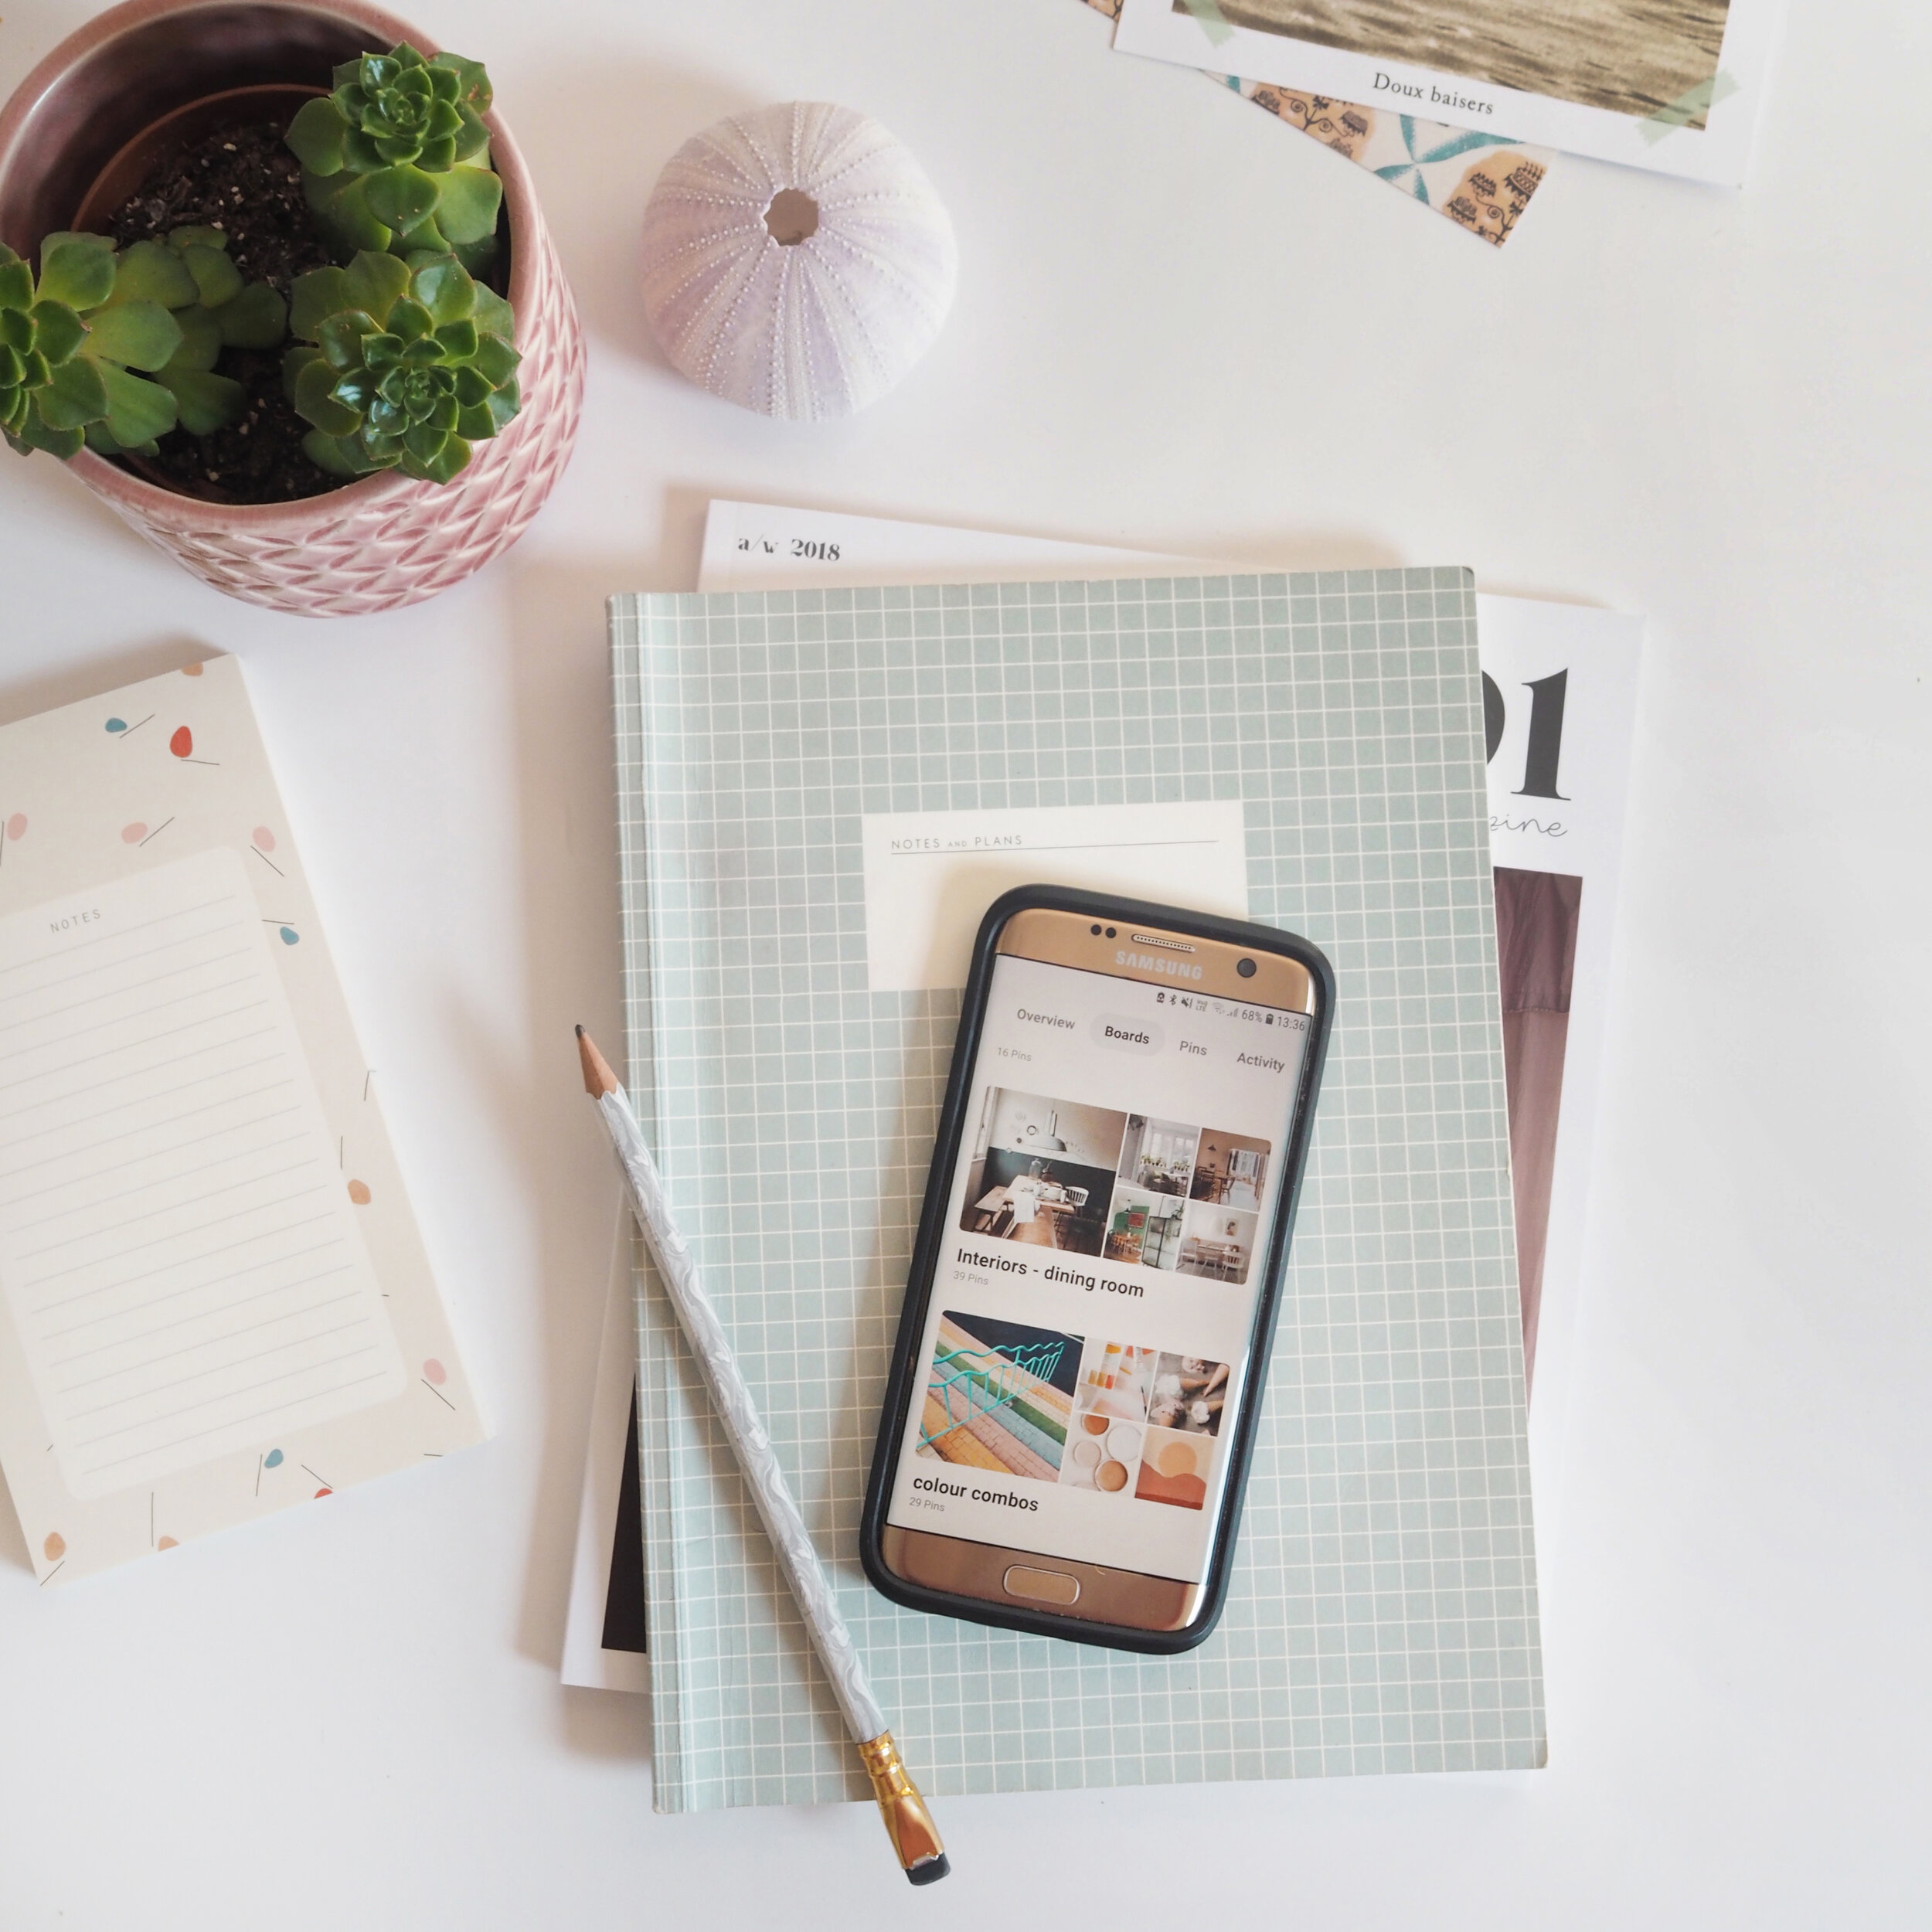 How to use Pinterest to grow your small business